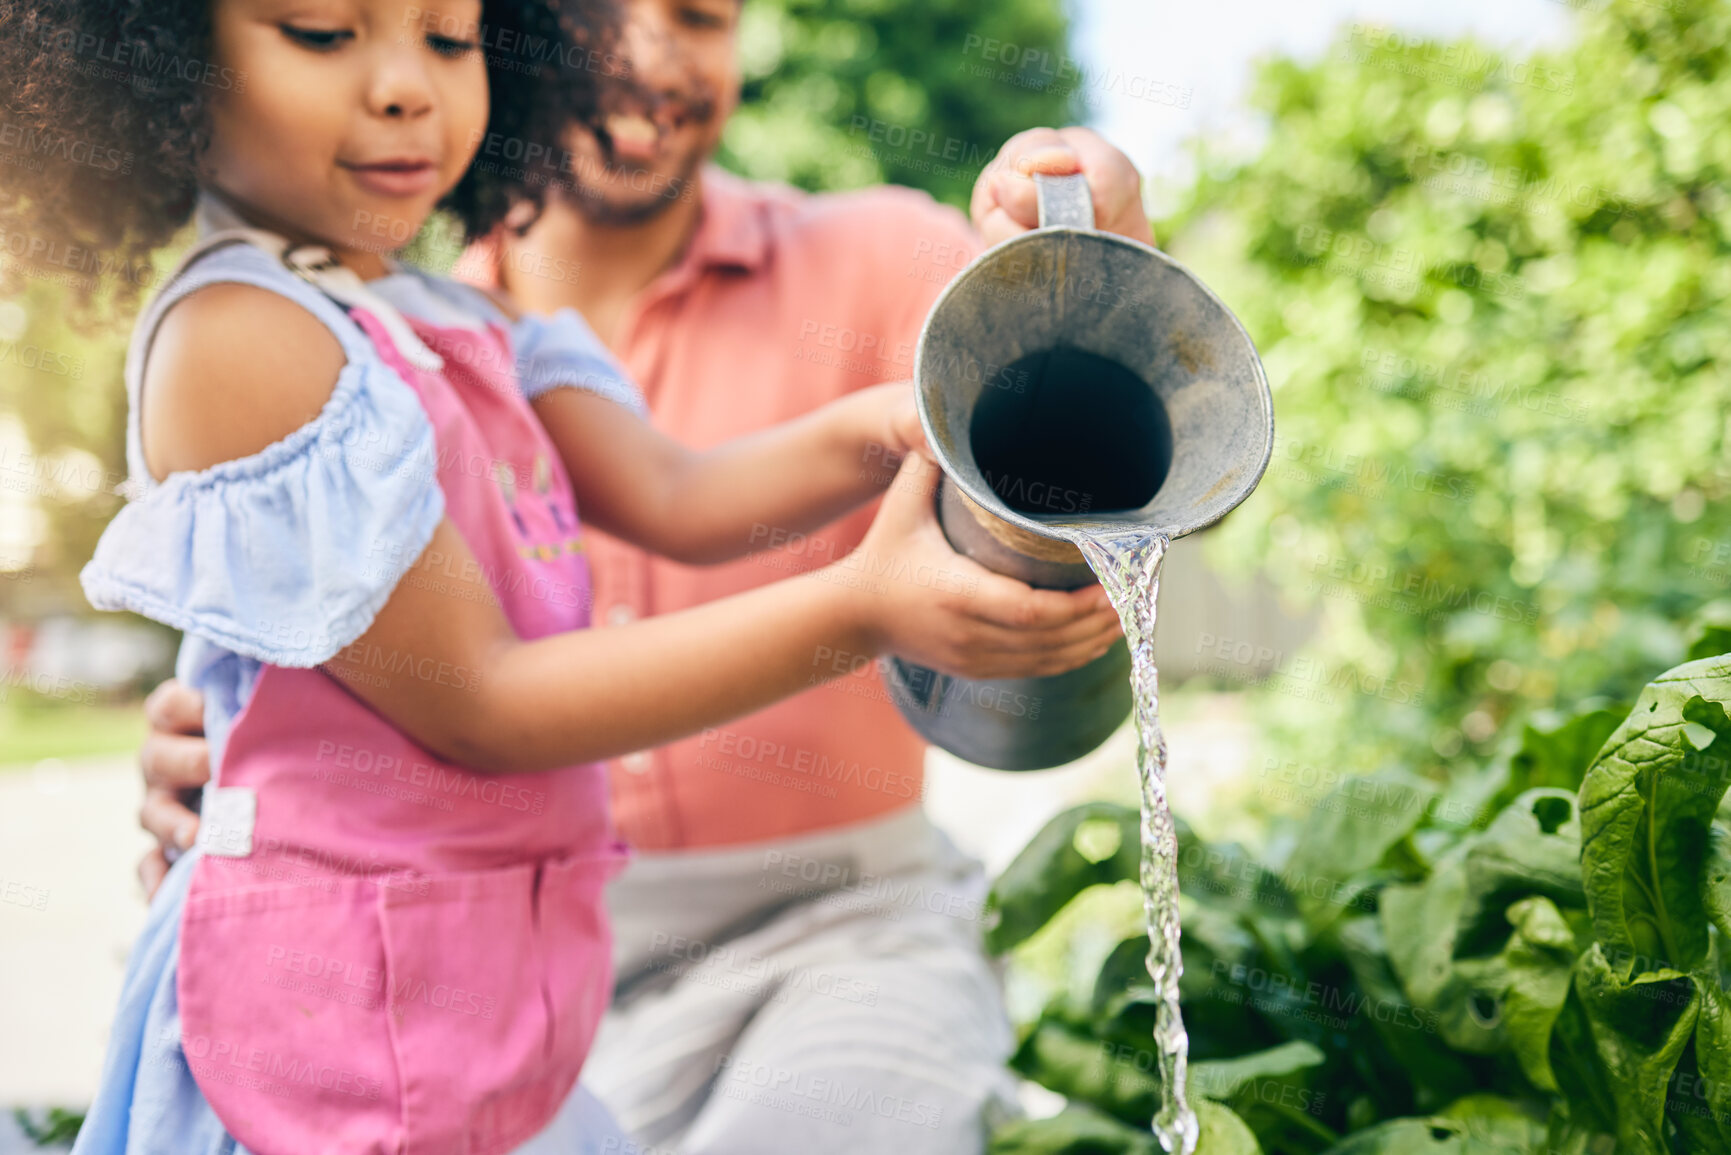 Buy stock photo Gardening, father and daughter water plants, teaching and learning with growth in nature together. Backyard, sustainability and dad helping child watering vegetable garden with love, support and fun.